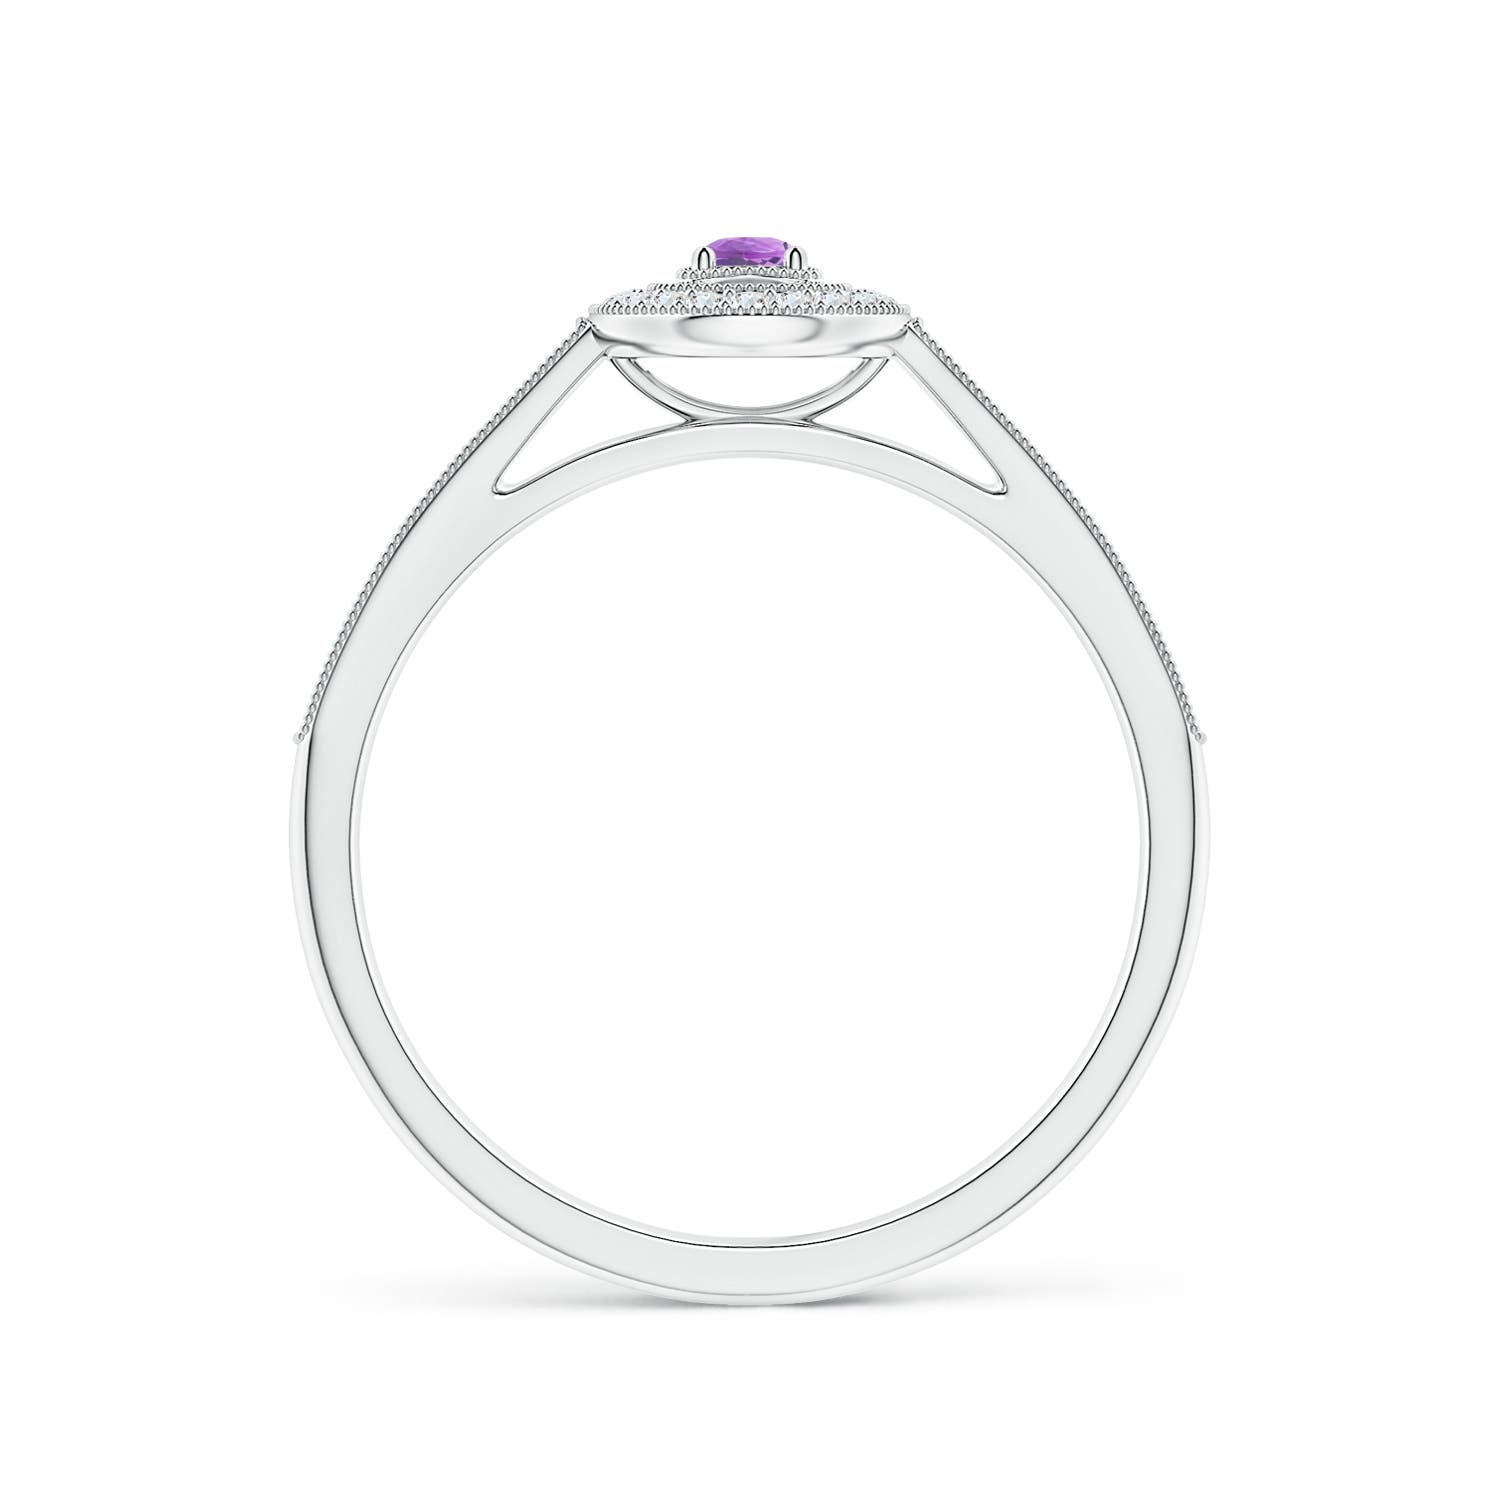 AA - Amethyst / 0.19 CT / 14 KT White Gold